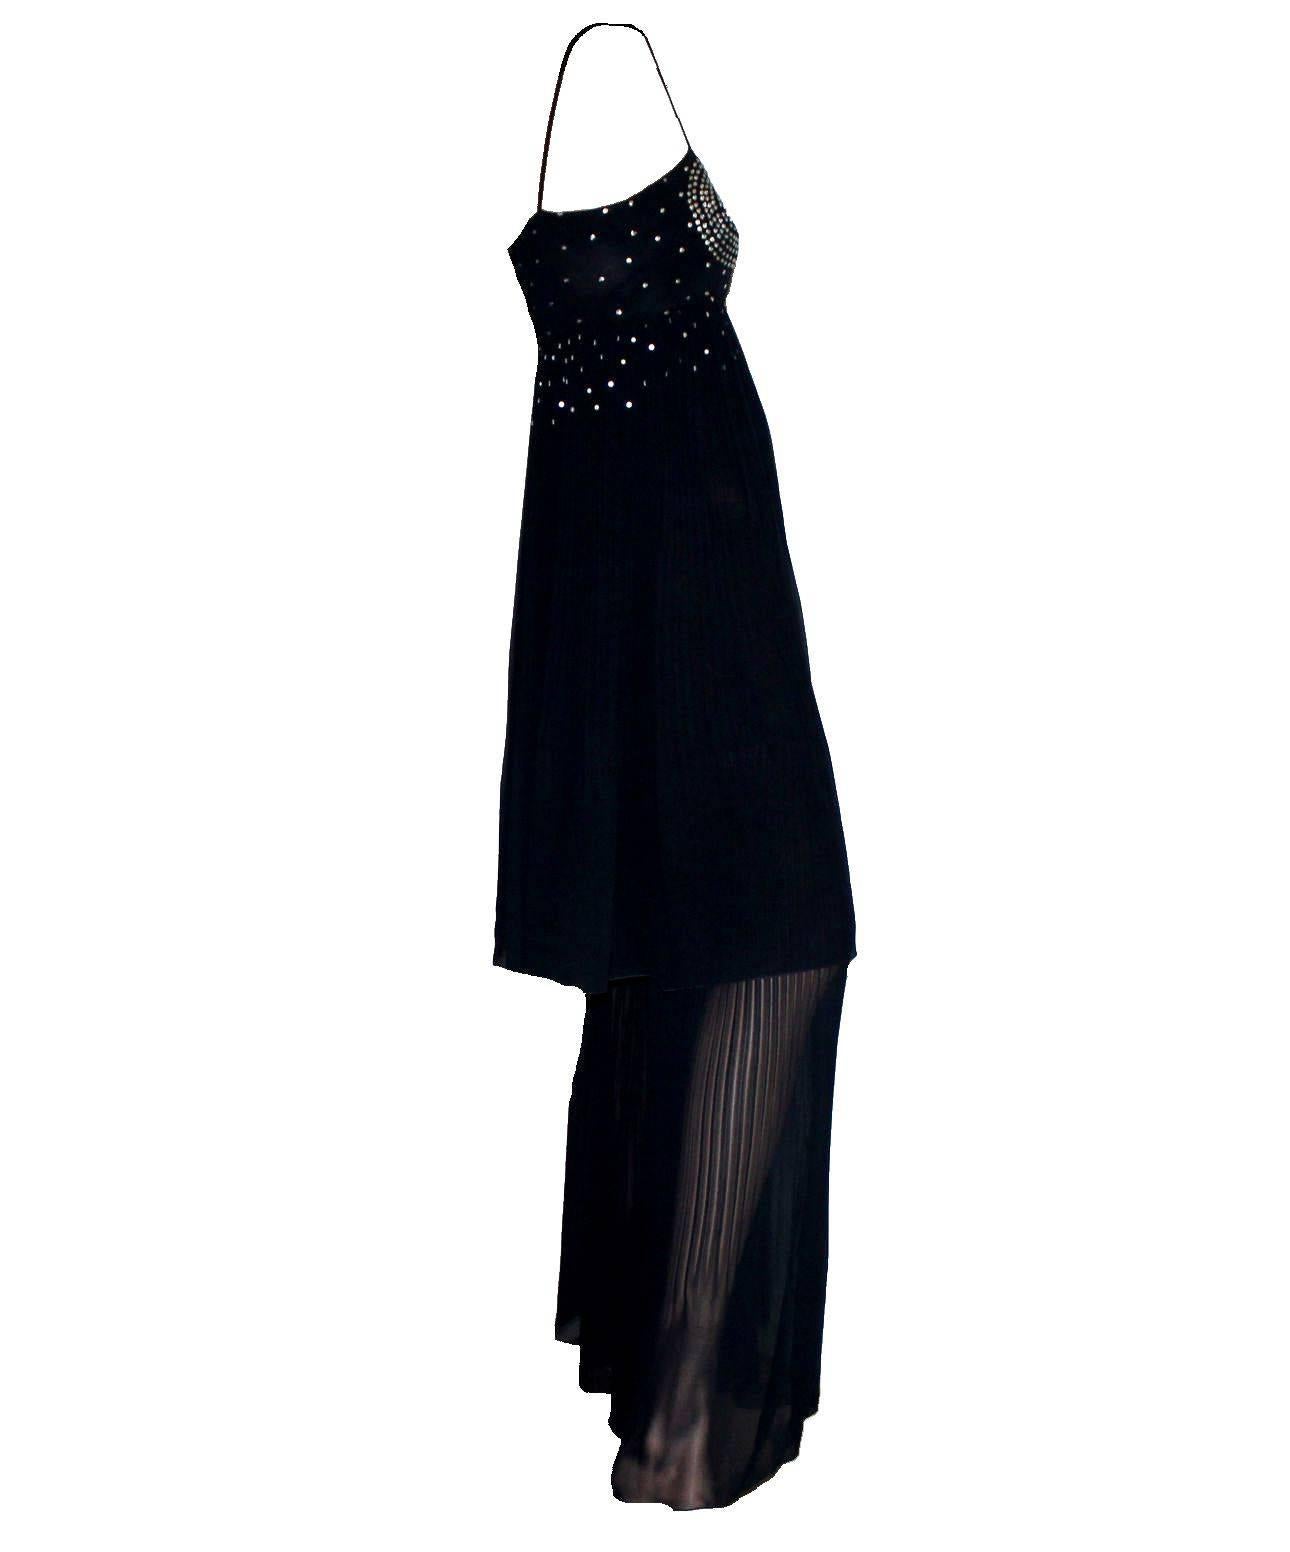 Amazing evening jumpsuit by Chanel
Stunning harem style
Wide palazzo legs
Finest midnight blue chiffon silk
Pleated details
Embroidered sequins on upper part
CC logo plate
Simply slips on
Zip on side
Made in France
Dry Clean Only
Size 38
Unworn